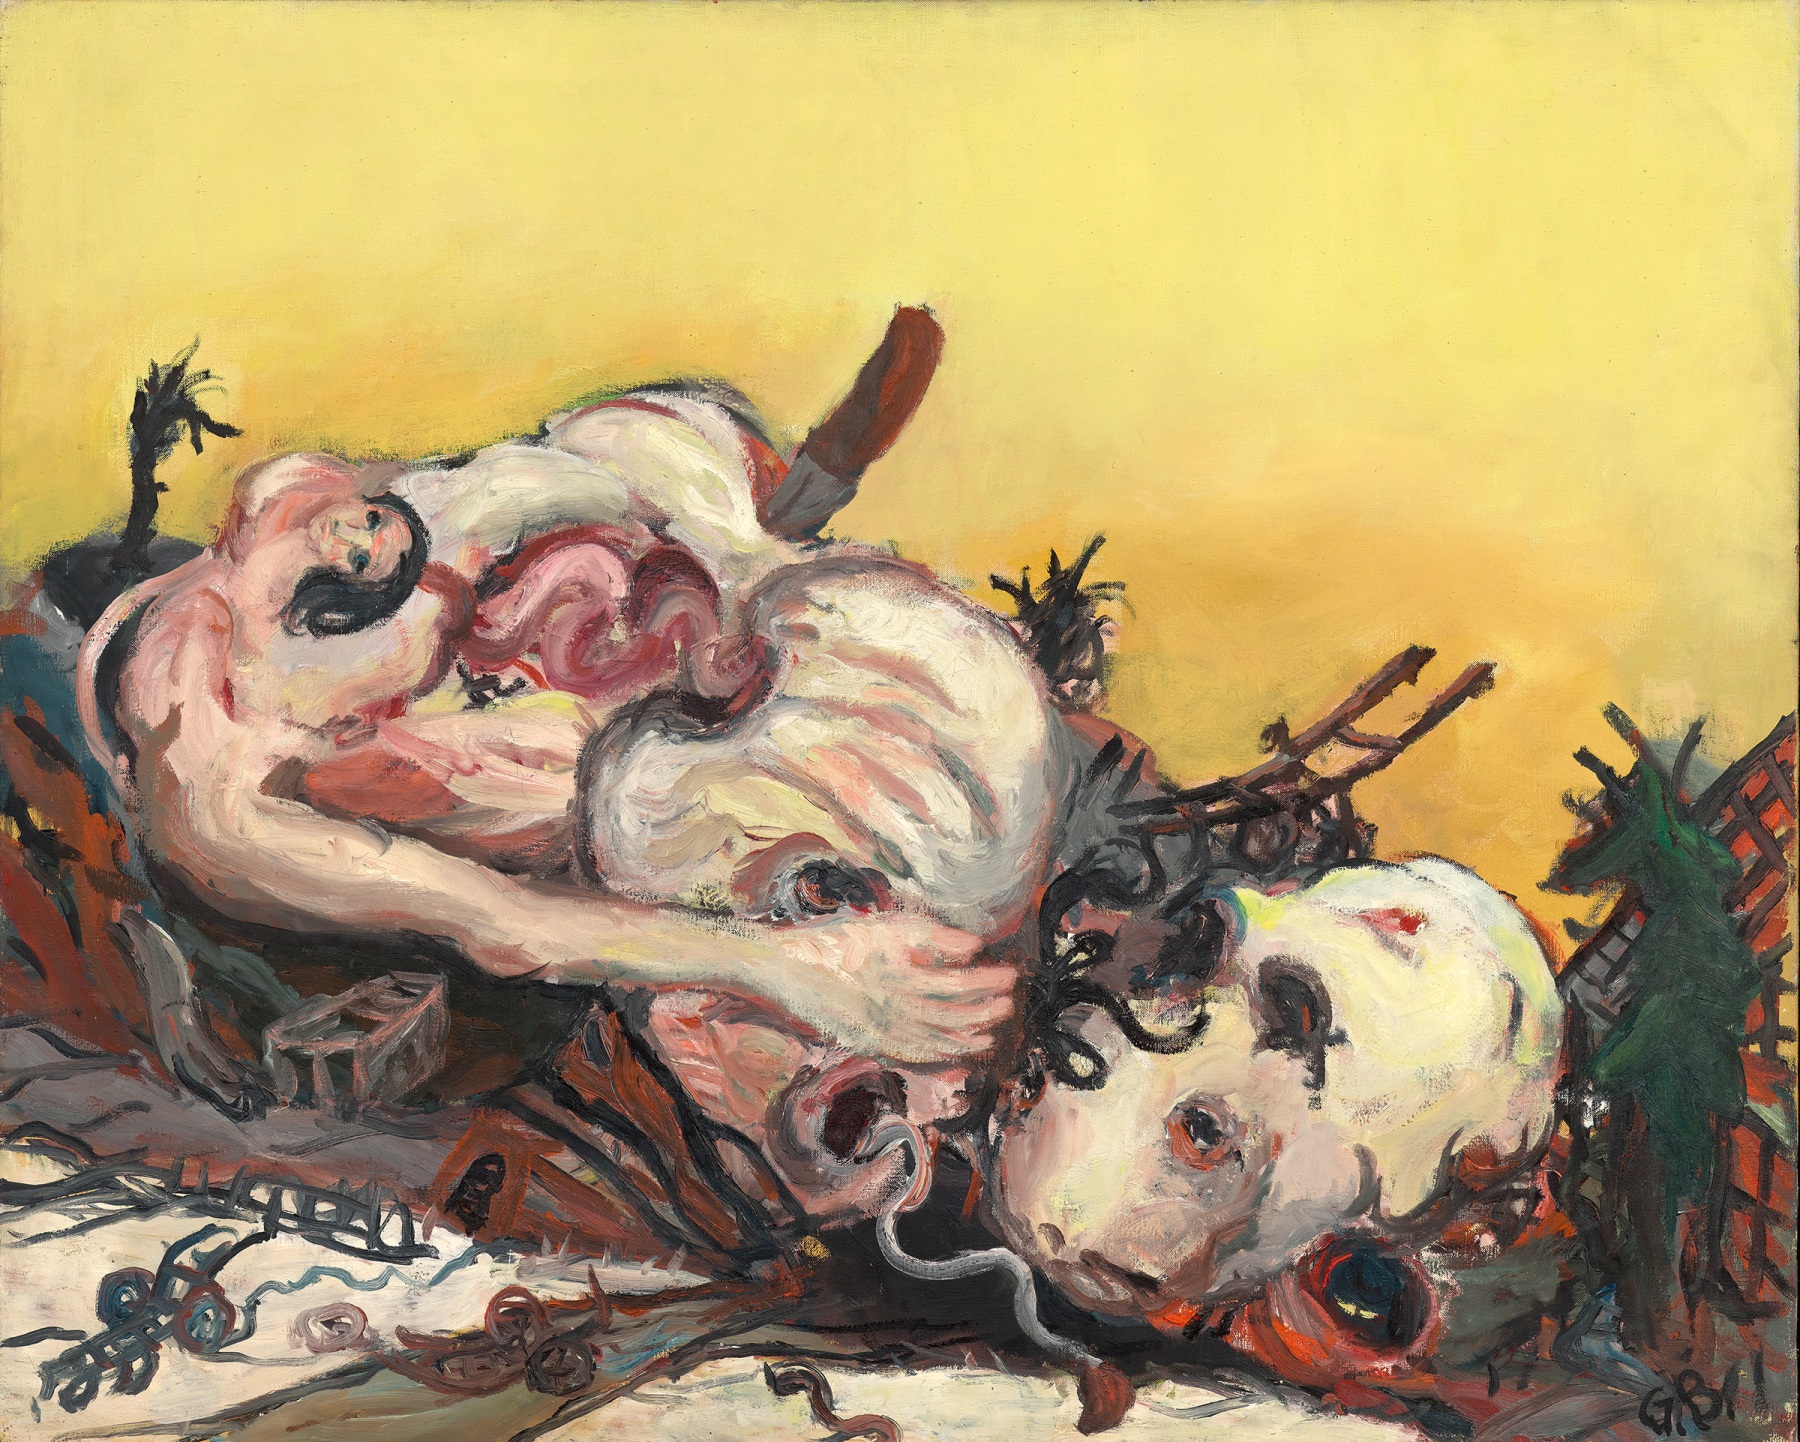 “Georg Baselitz: I Was Born into a Destroyed Order” -  - Viewing Room - Michael Werner Gallery, New York and London